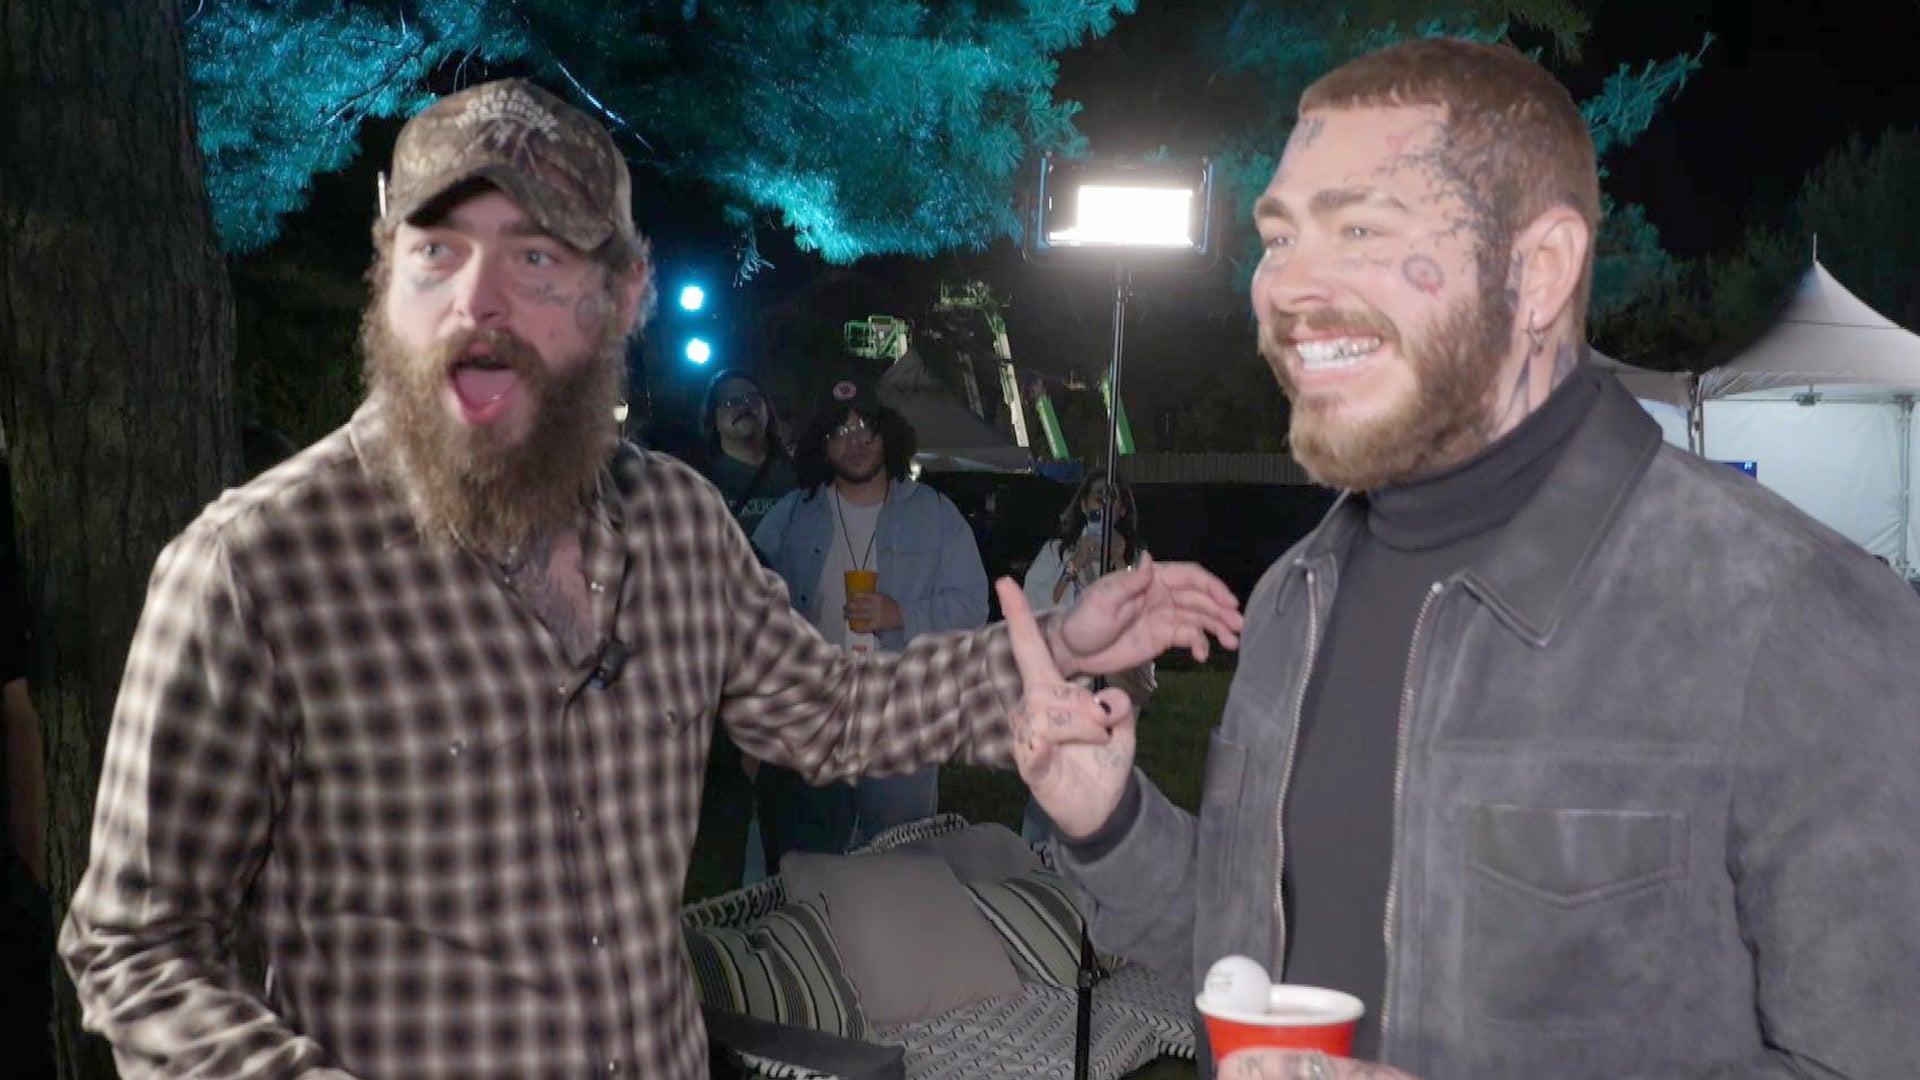 Post Malone in Shock Over His First Wax Figure